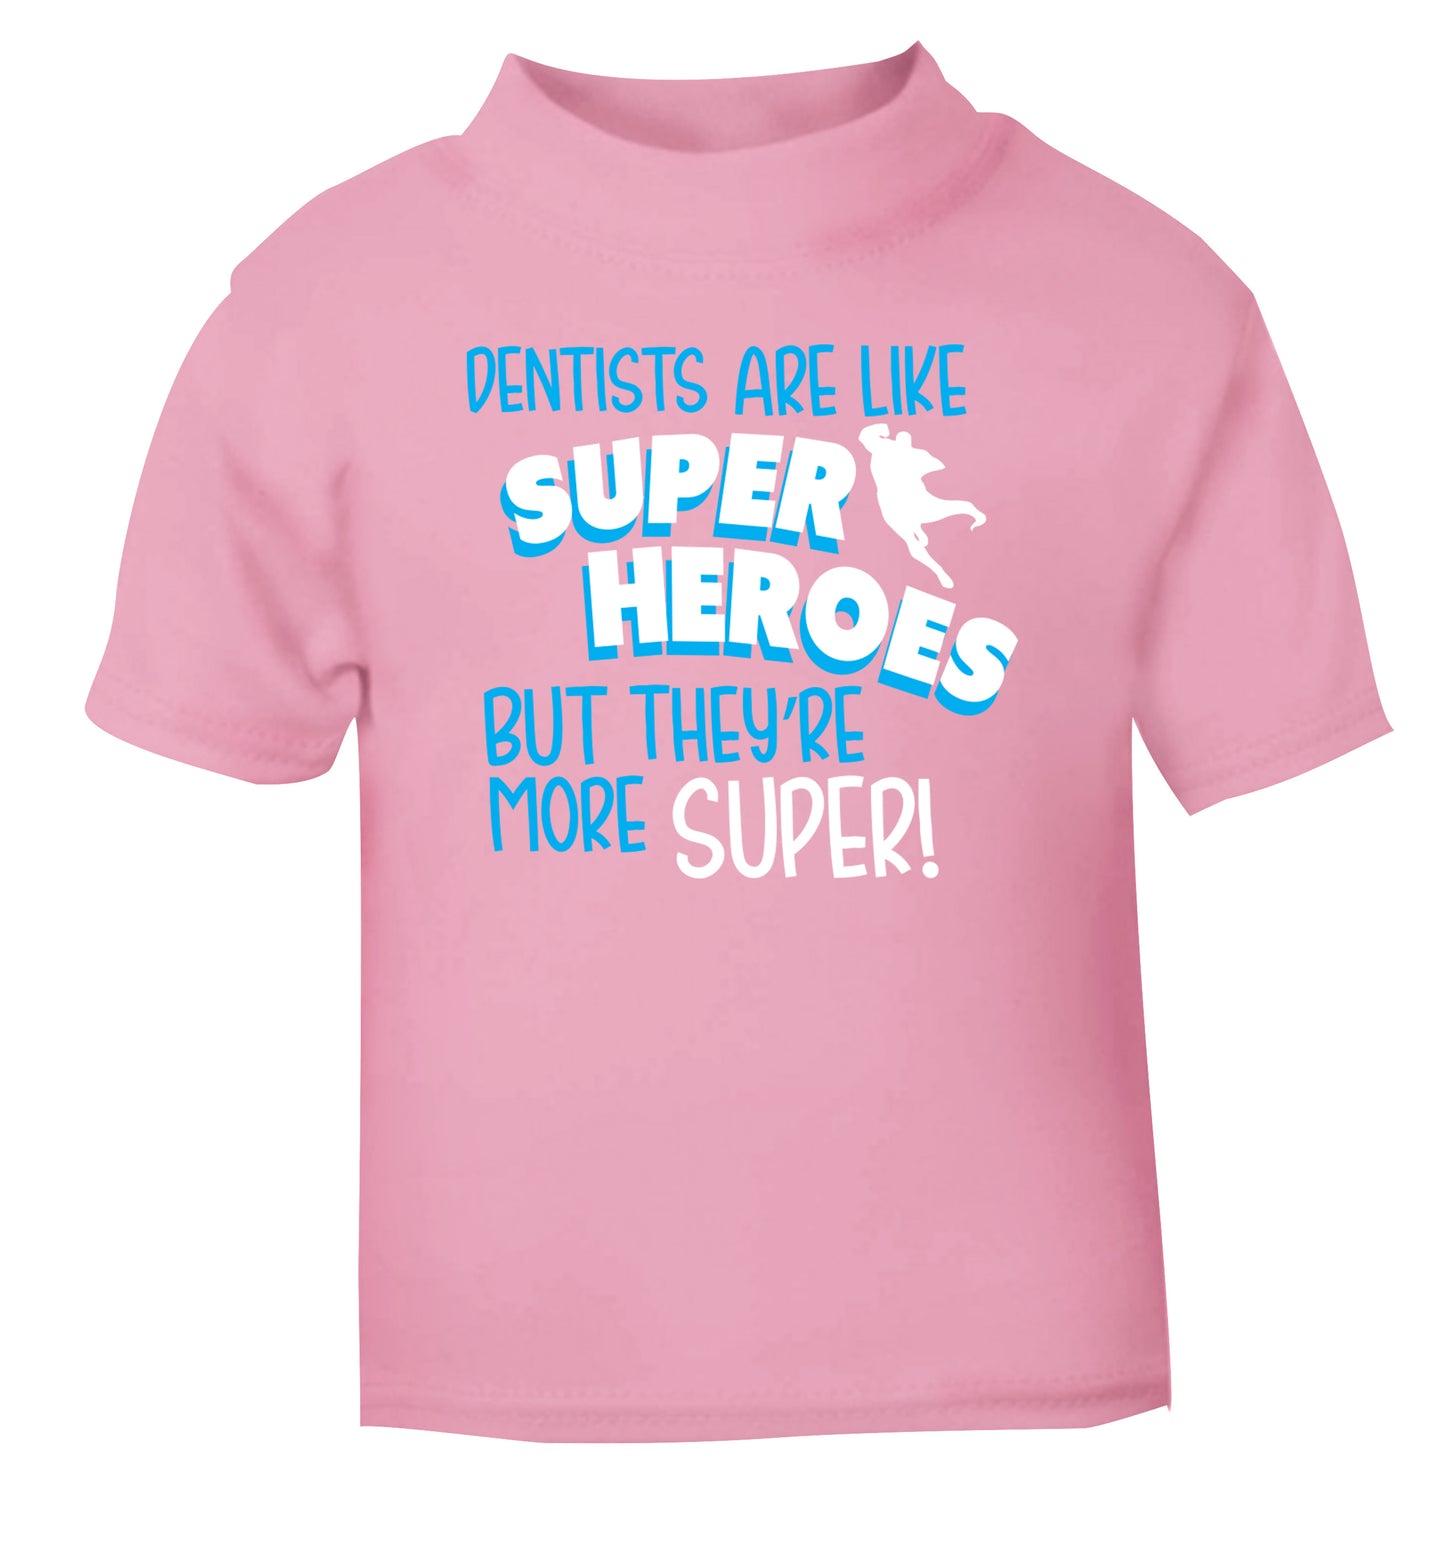 Dentists are like superheros but they're more super light pink Baby Toddler Tshirt 2 Years